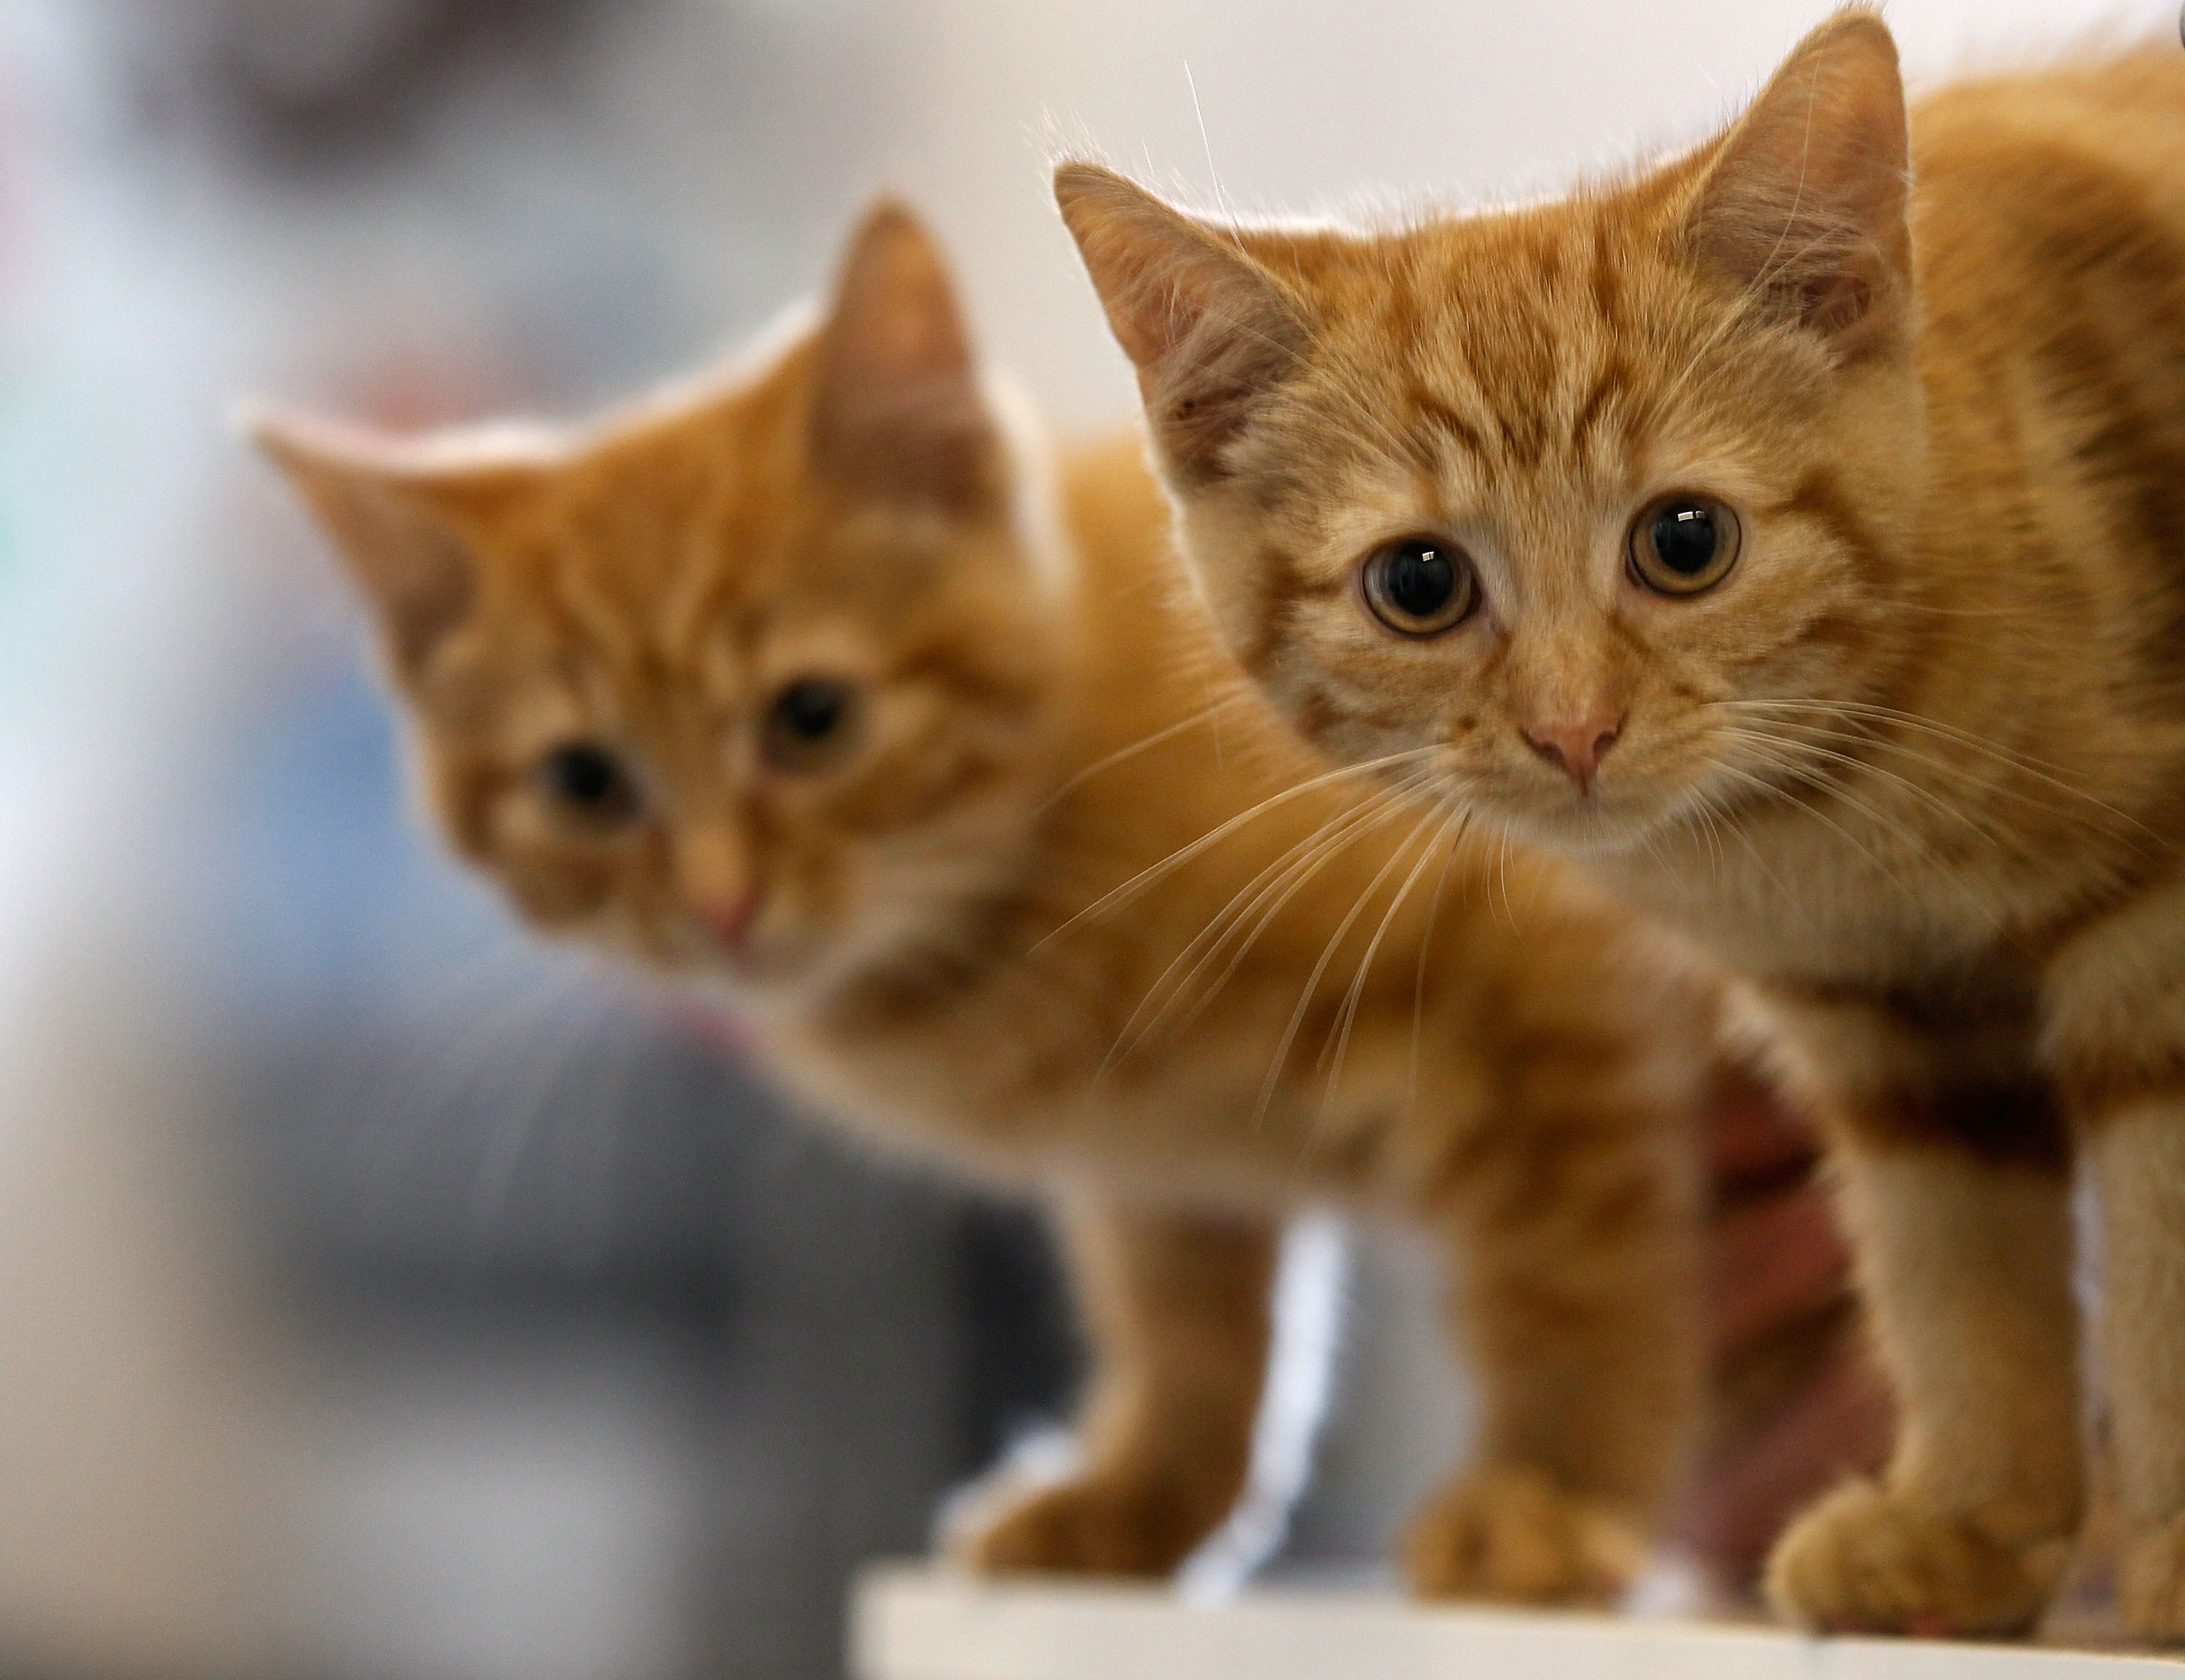 Milly, a 13-week-old kitten waits with her brother Charlie (L) to be re-homed at The Society for Abandoned Animals Sanctuary in Sale, Manchester which is facing an urgent cash crisis and possible closure on July 27, 2010 in Manchester, England. (Christopher Furlong&mdash;Getty Images)